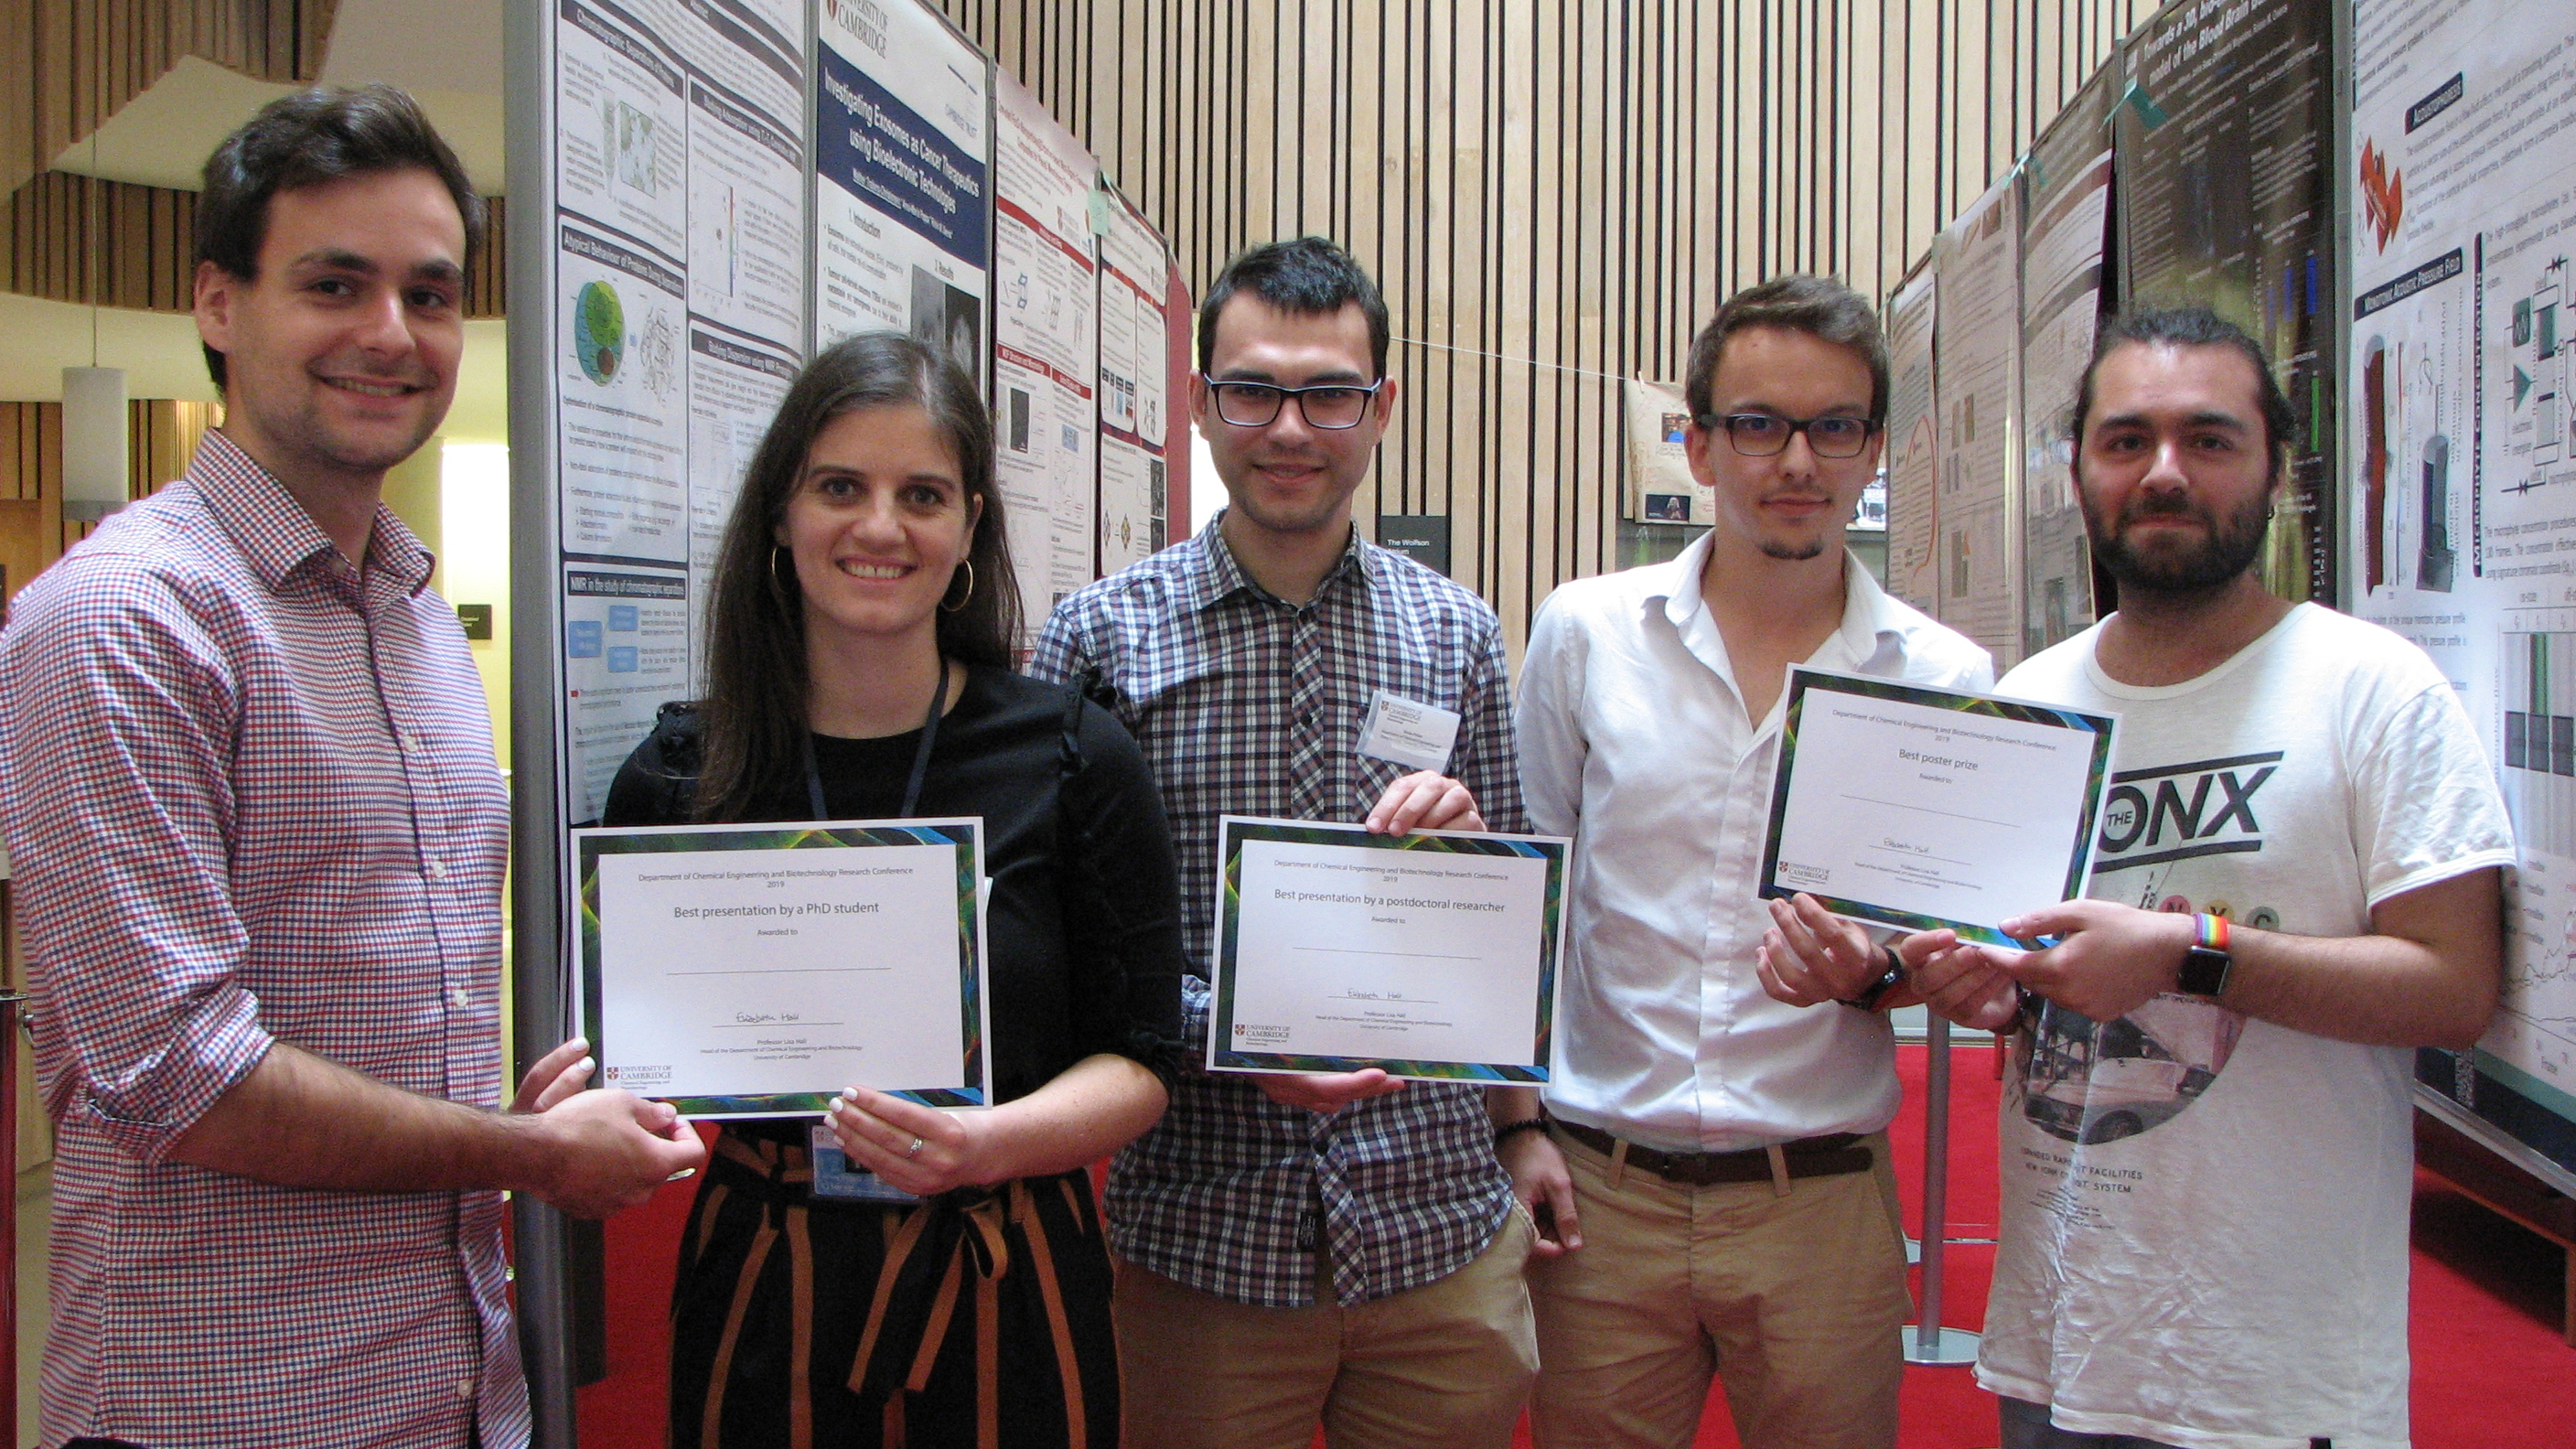 Prize winners from our research conference